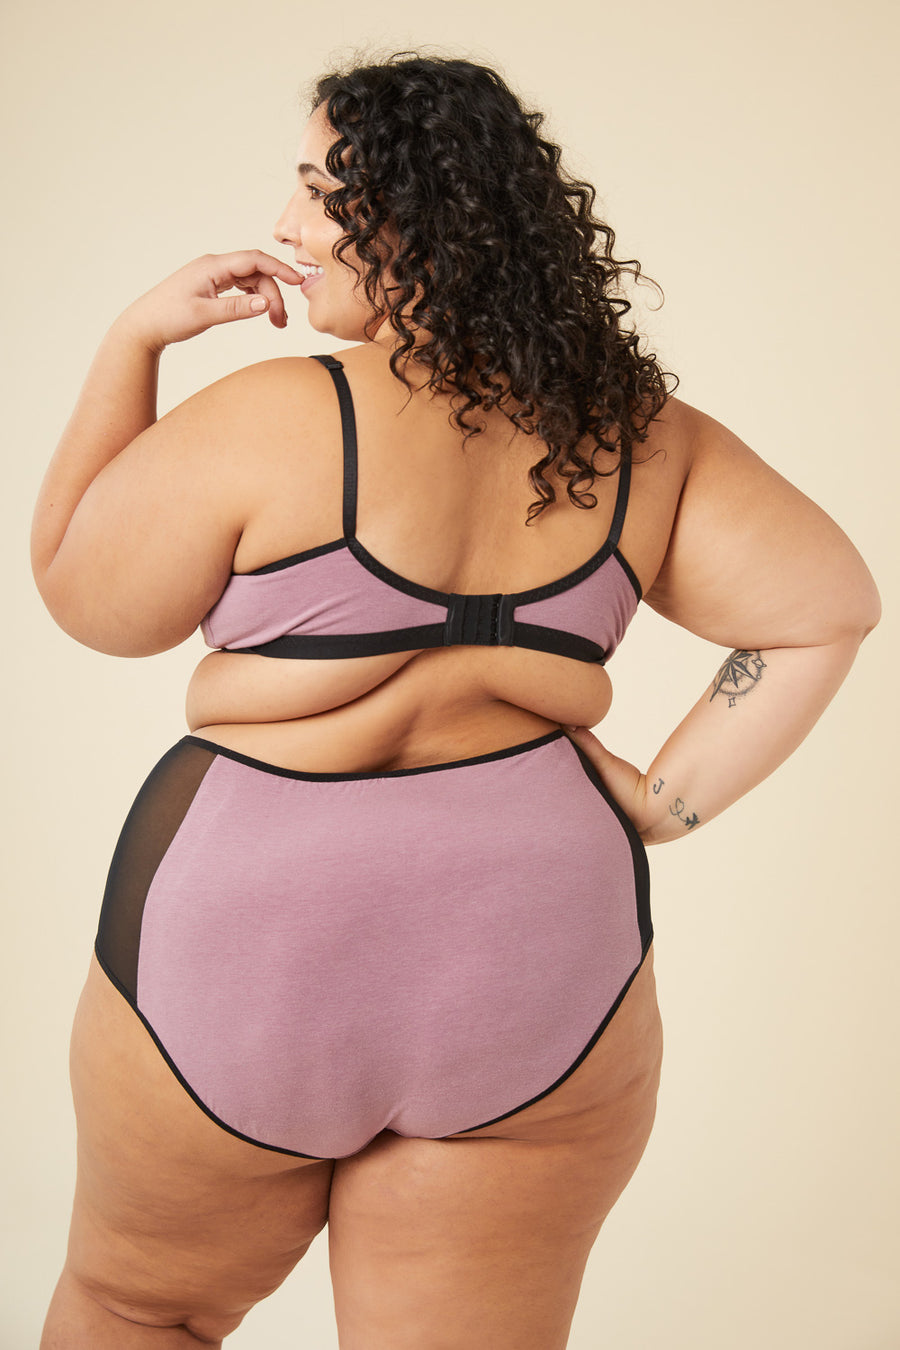 New underwear has us in our feels, every day of the week. 🥰 Shop